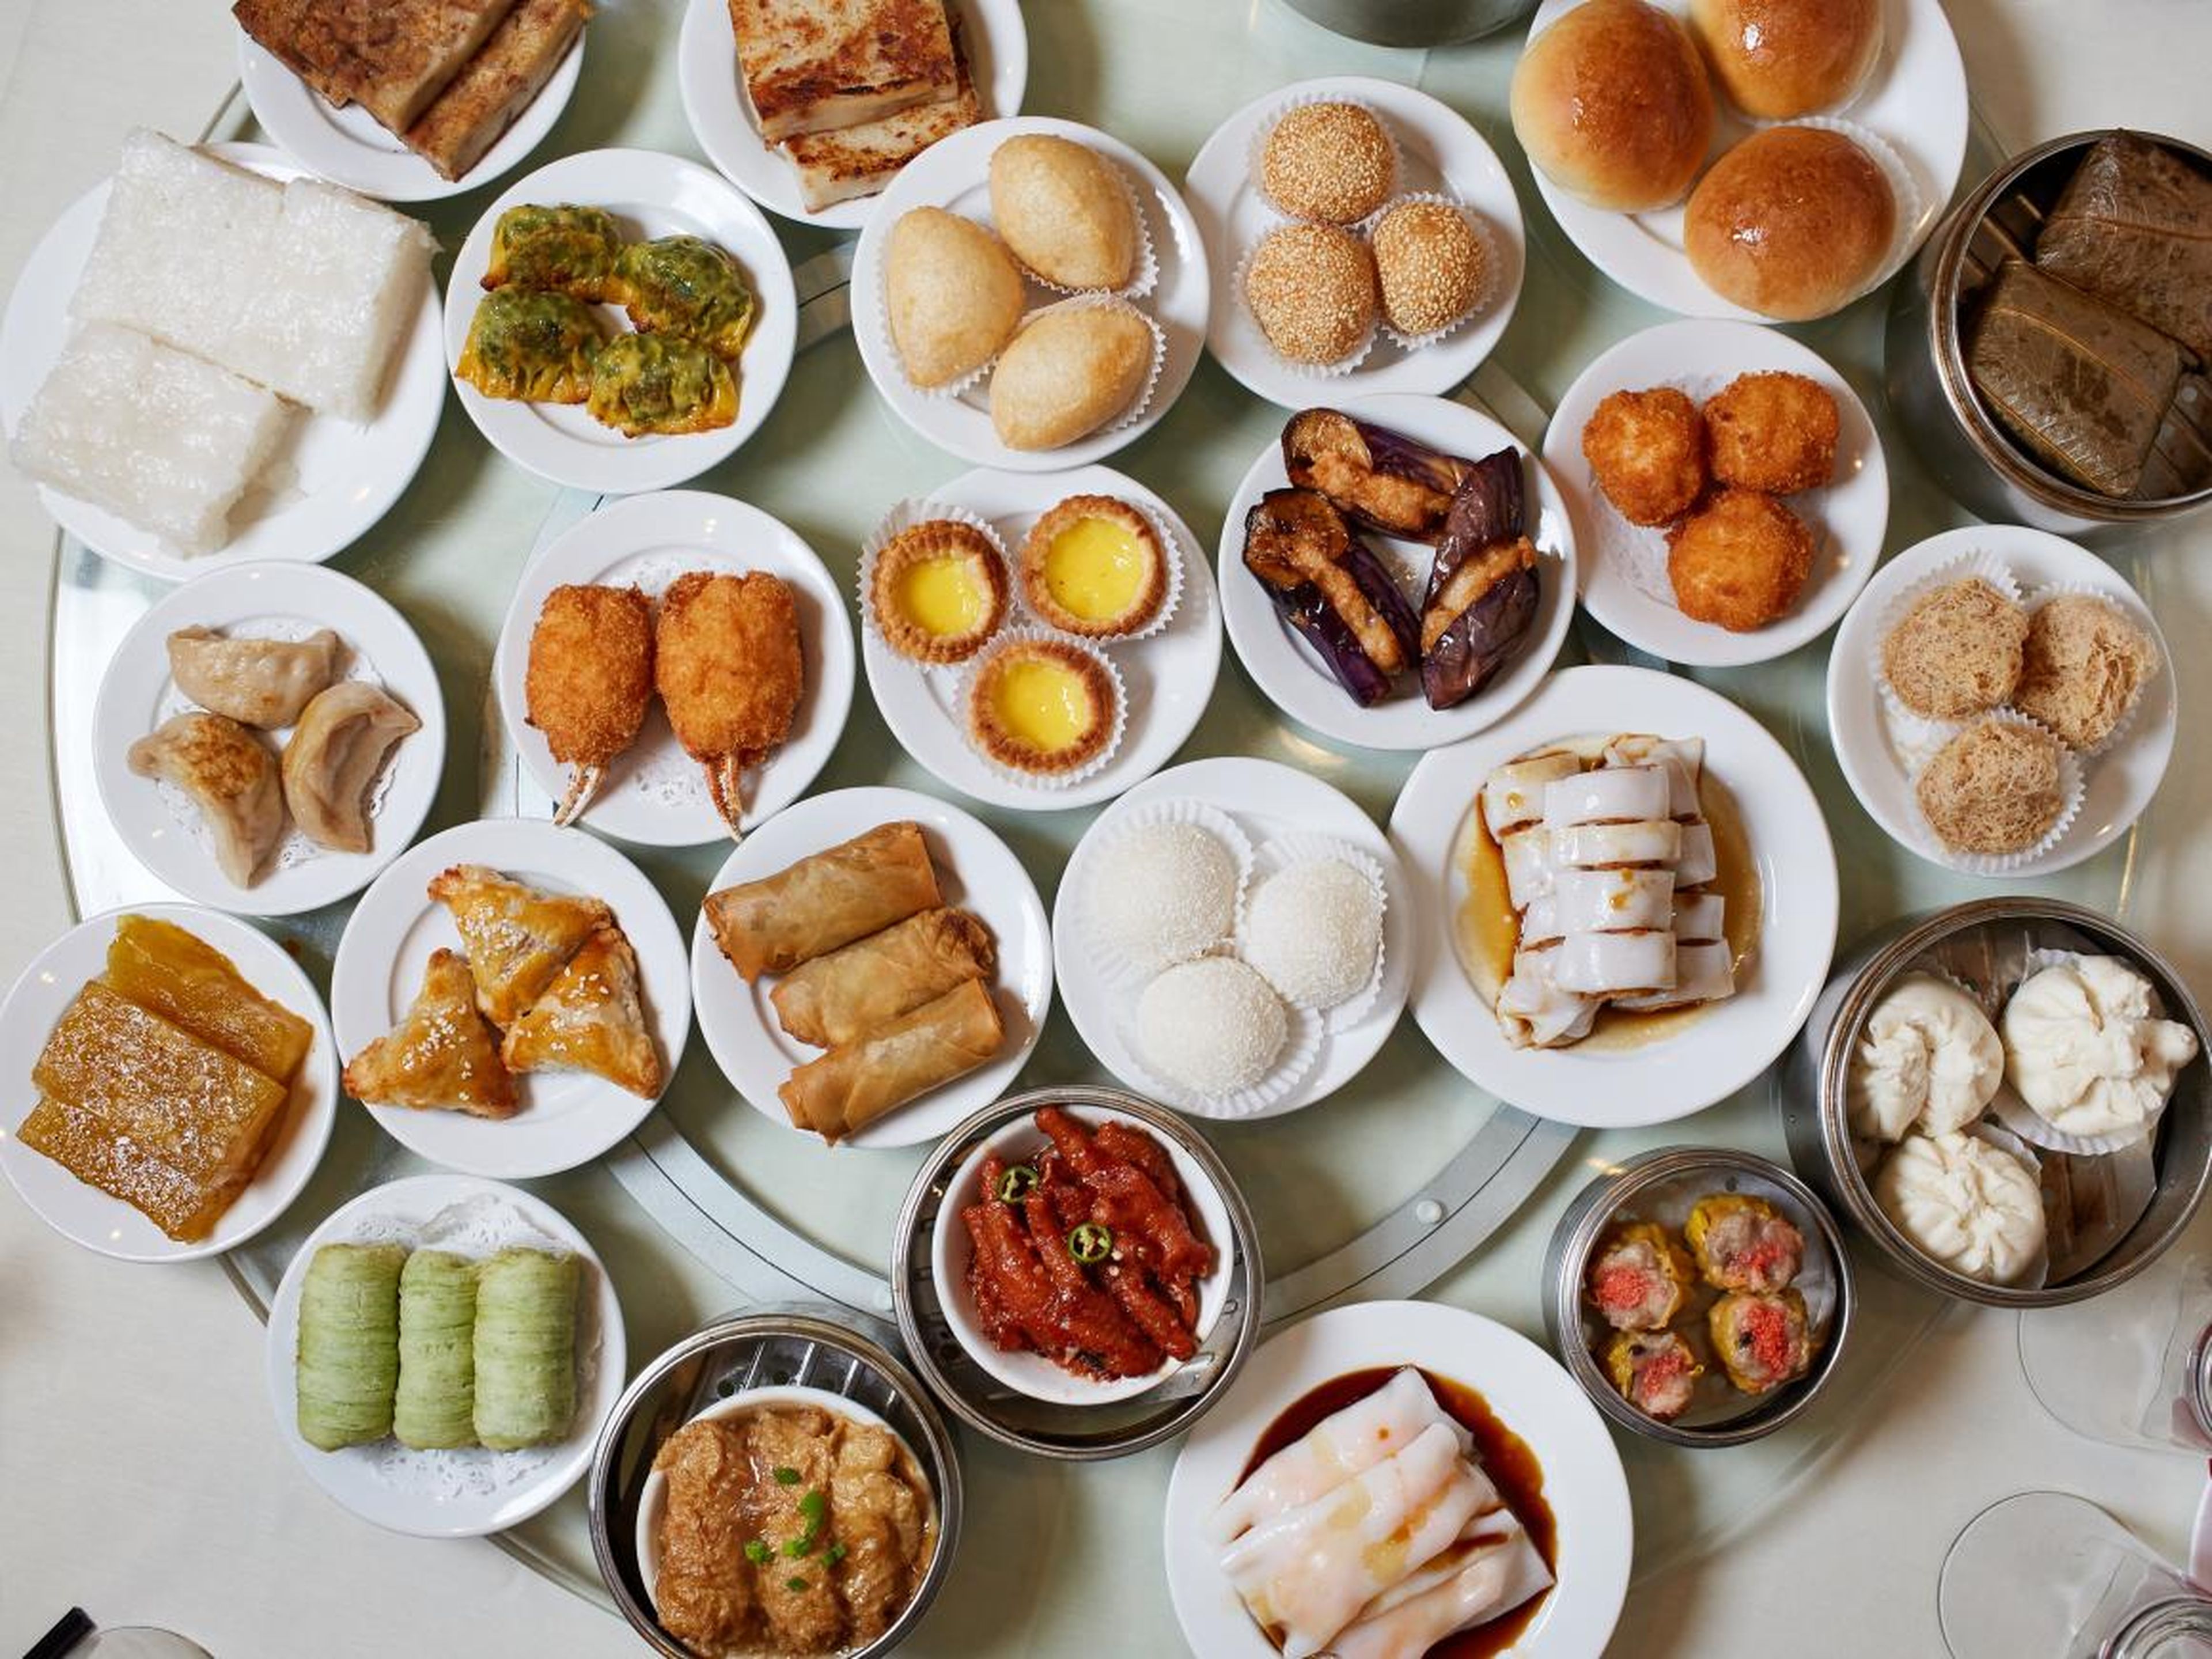 With 3,100 pieces of dim sum and 764 participants, each person could've eaten about four pieces of dim sum.